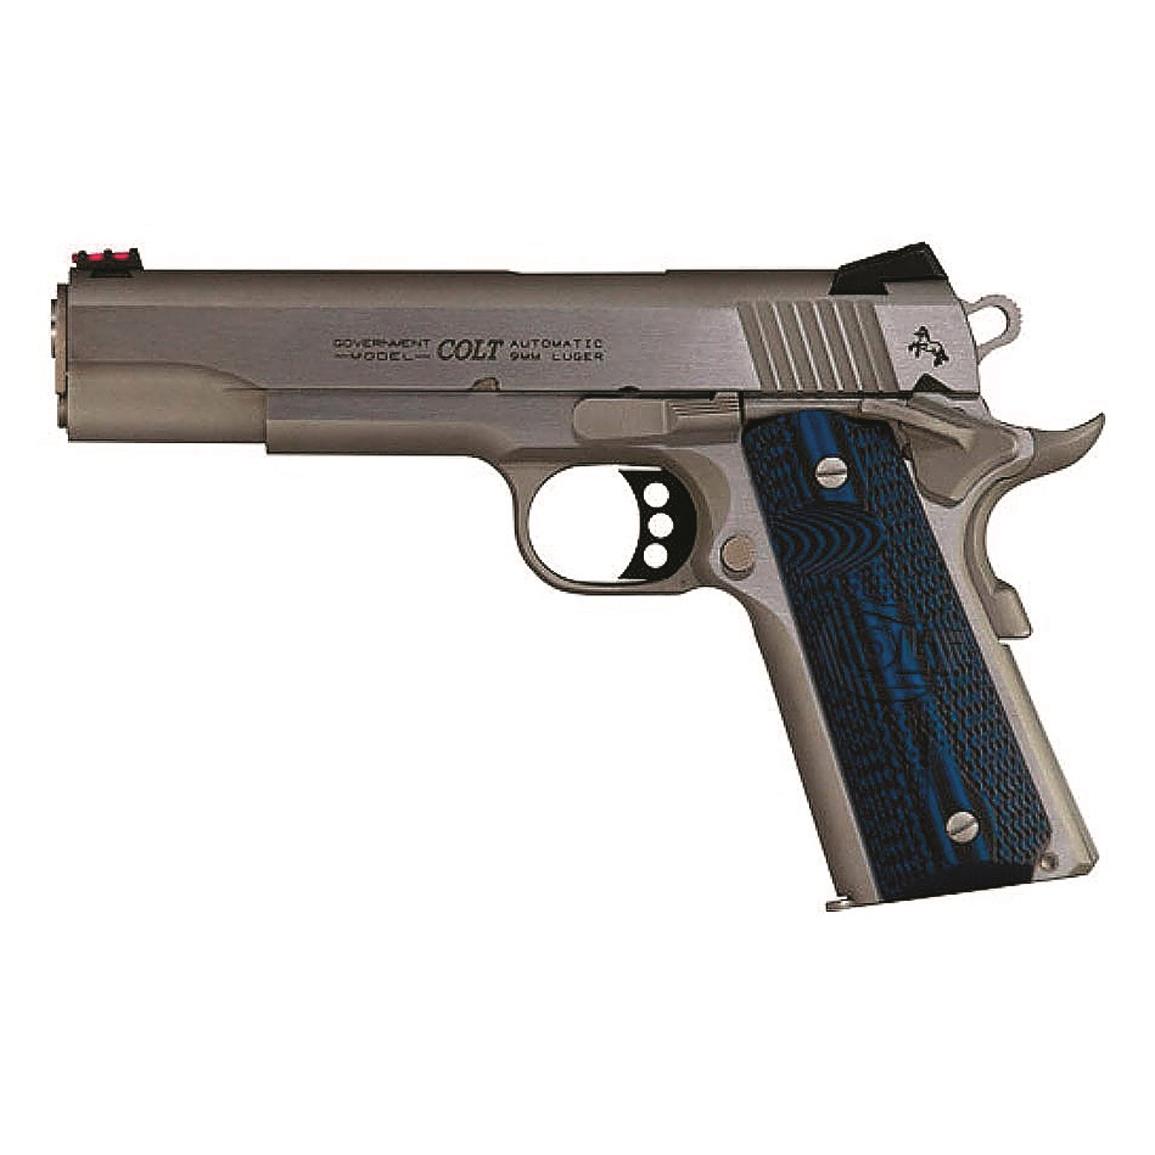 Colt Government Competition 1911 Stainless Steel, Semi-Automatic, 9mm, 5" Barrel, 9+1 Rounds